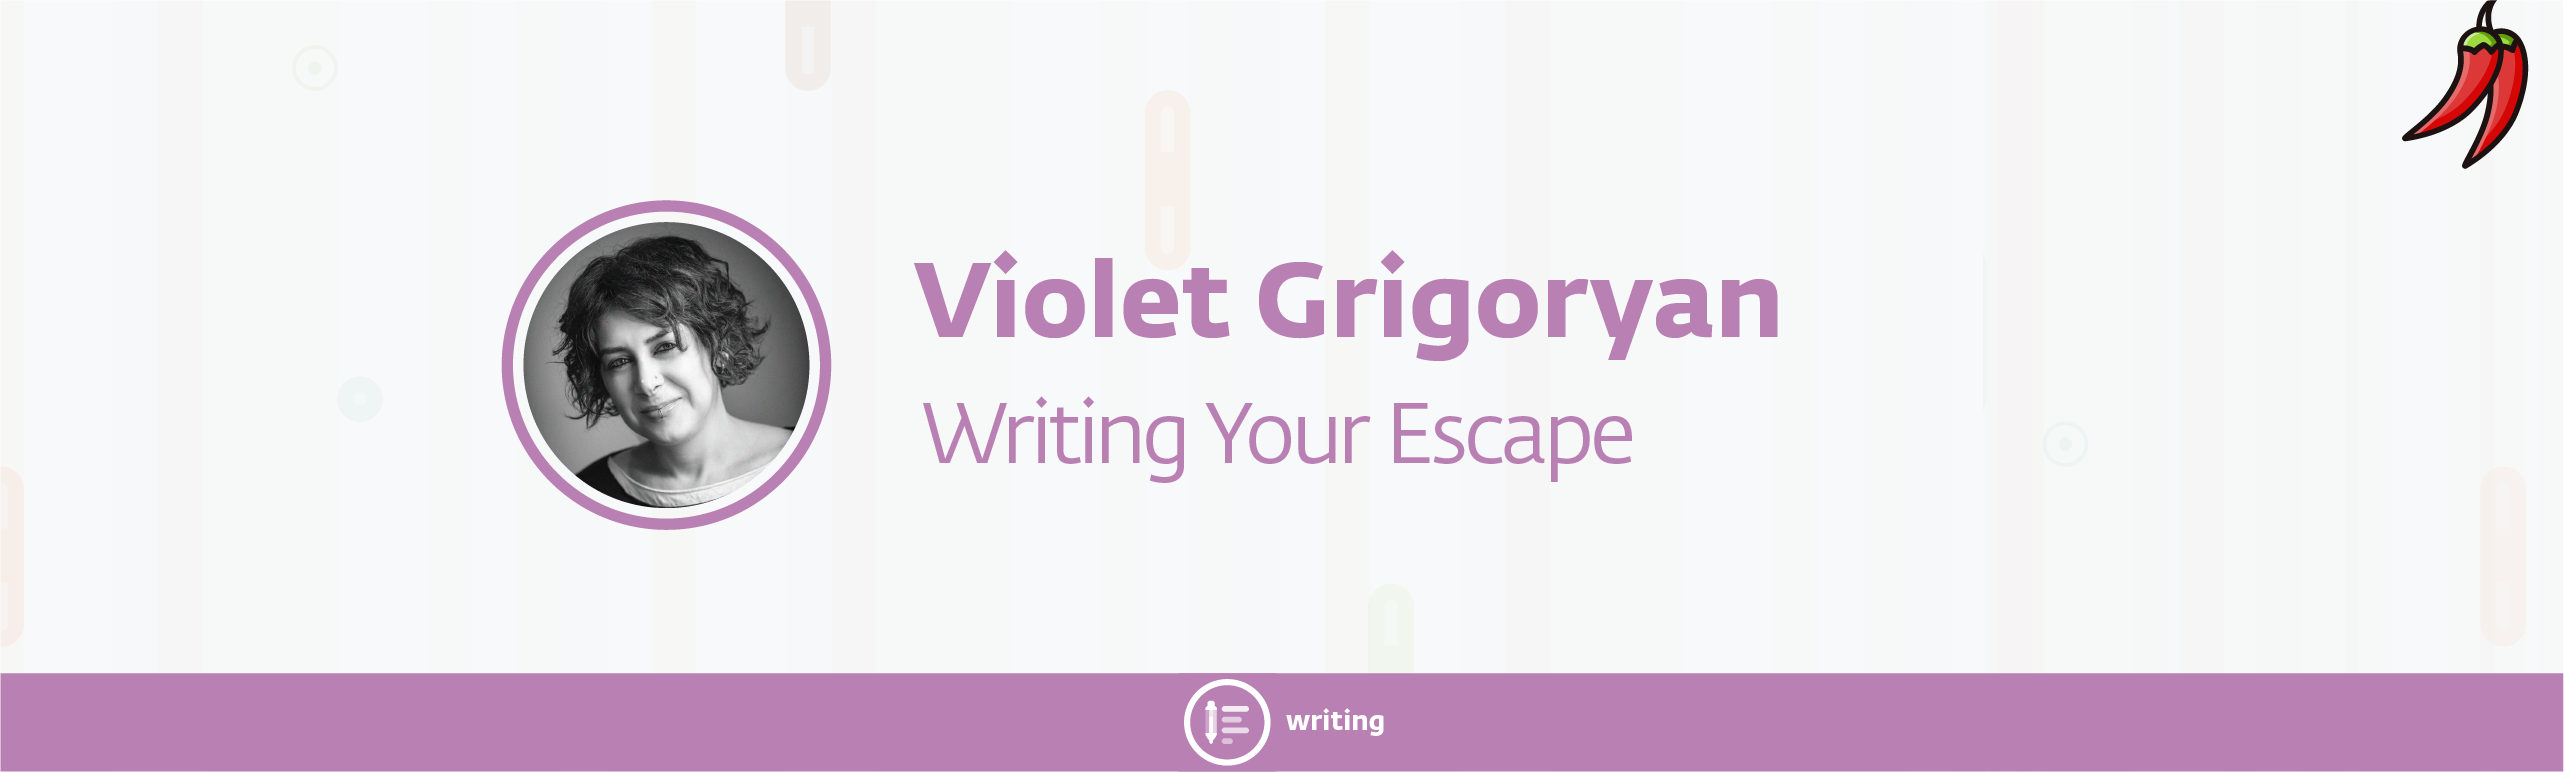 62 - Writing Your Escape